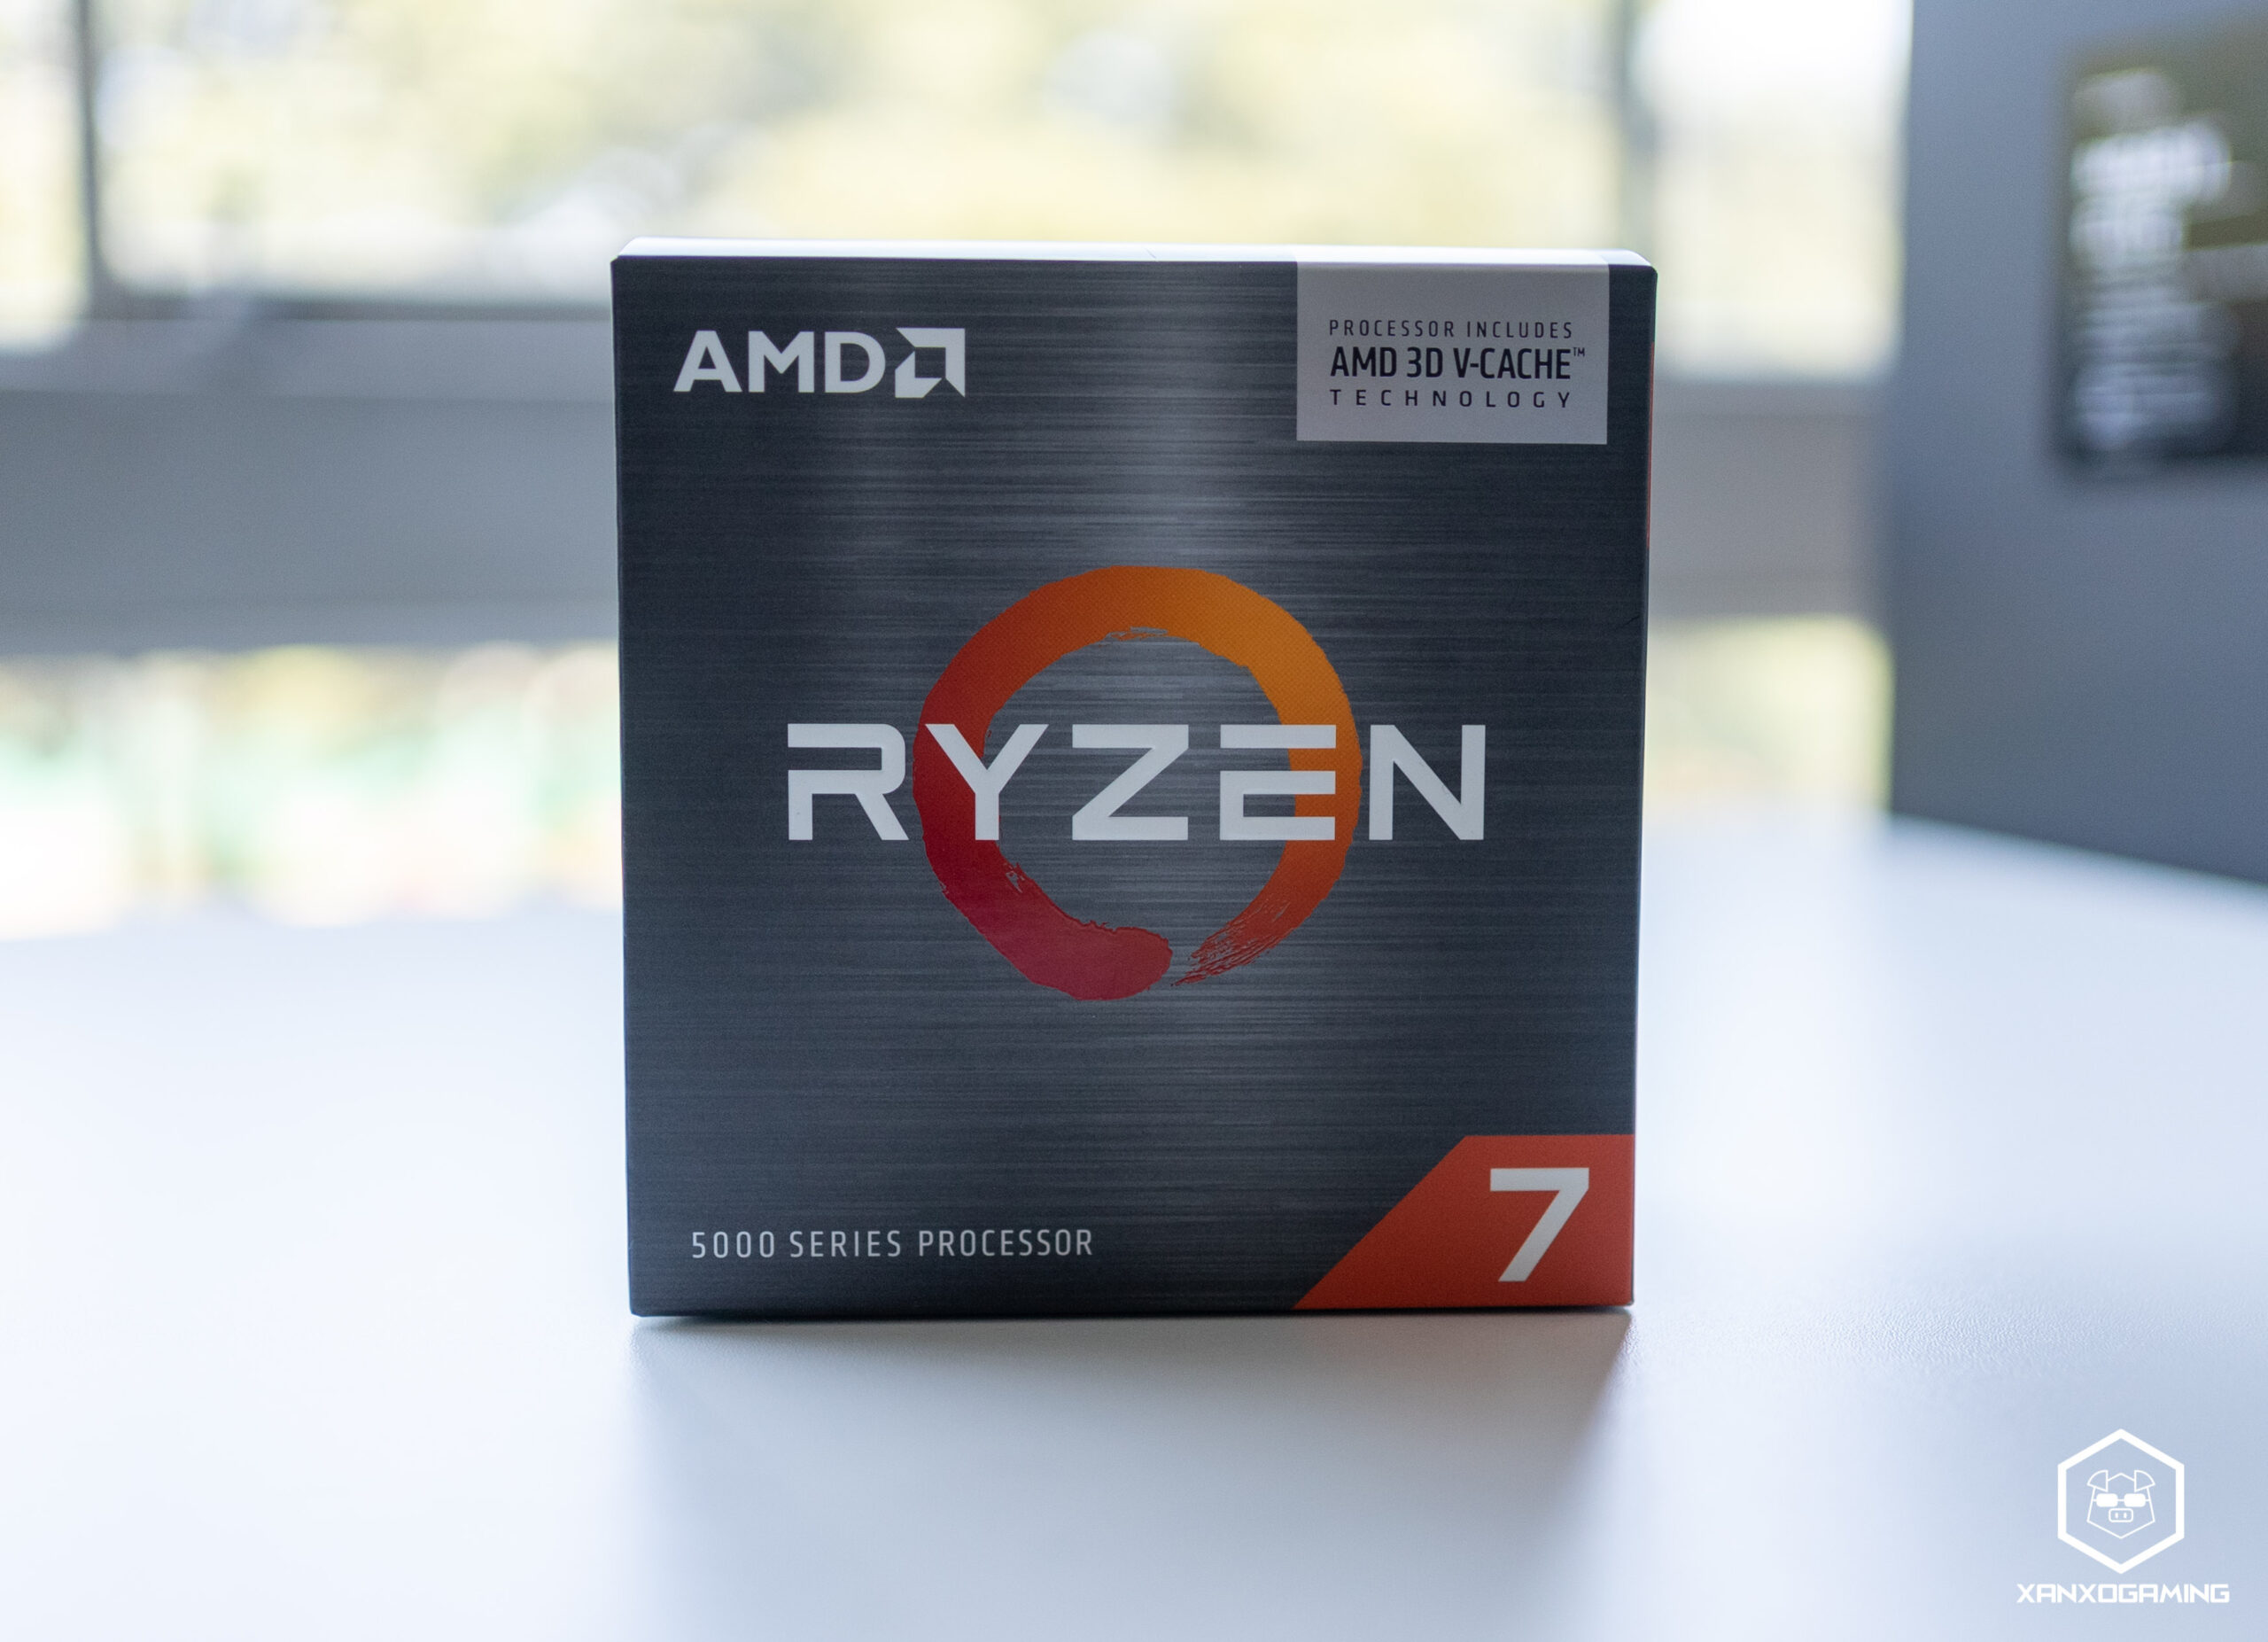 AMD's excellent value Ryzen 5 5600 processor is 32% off at